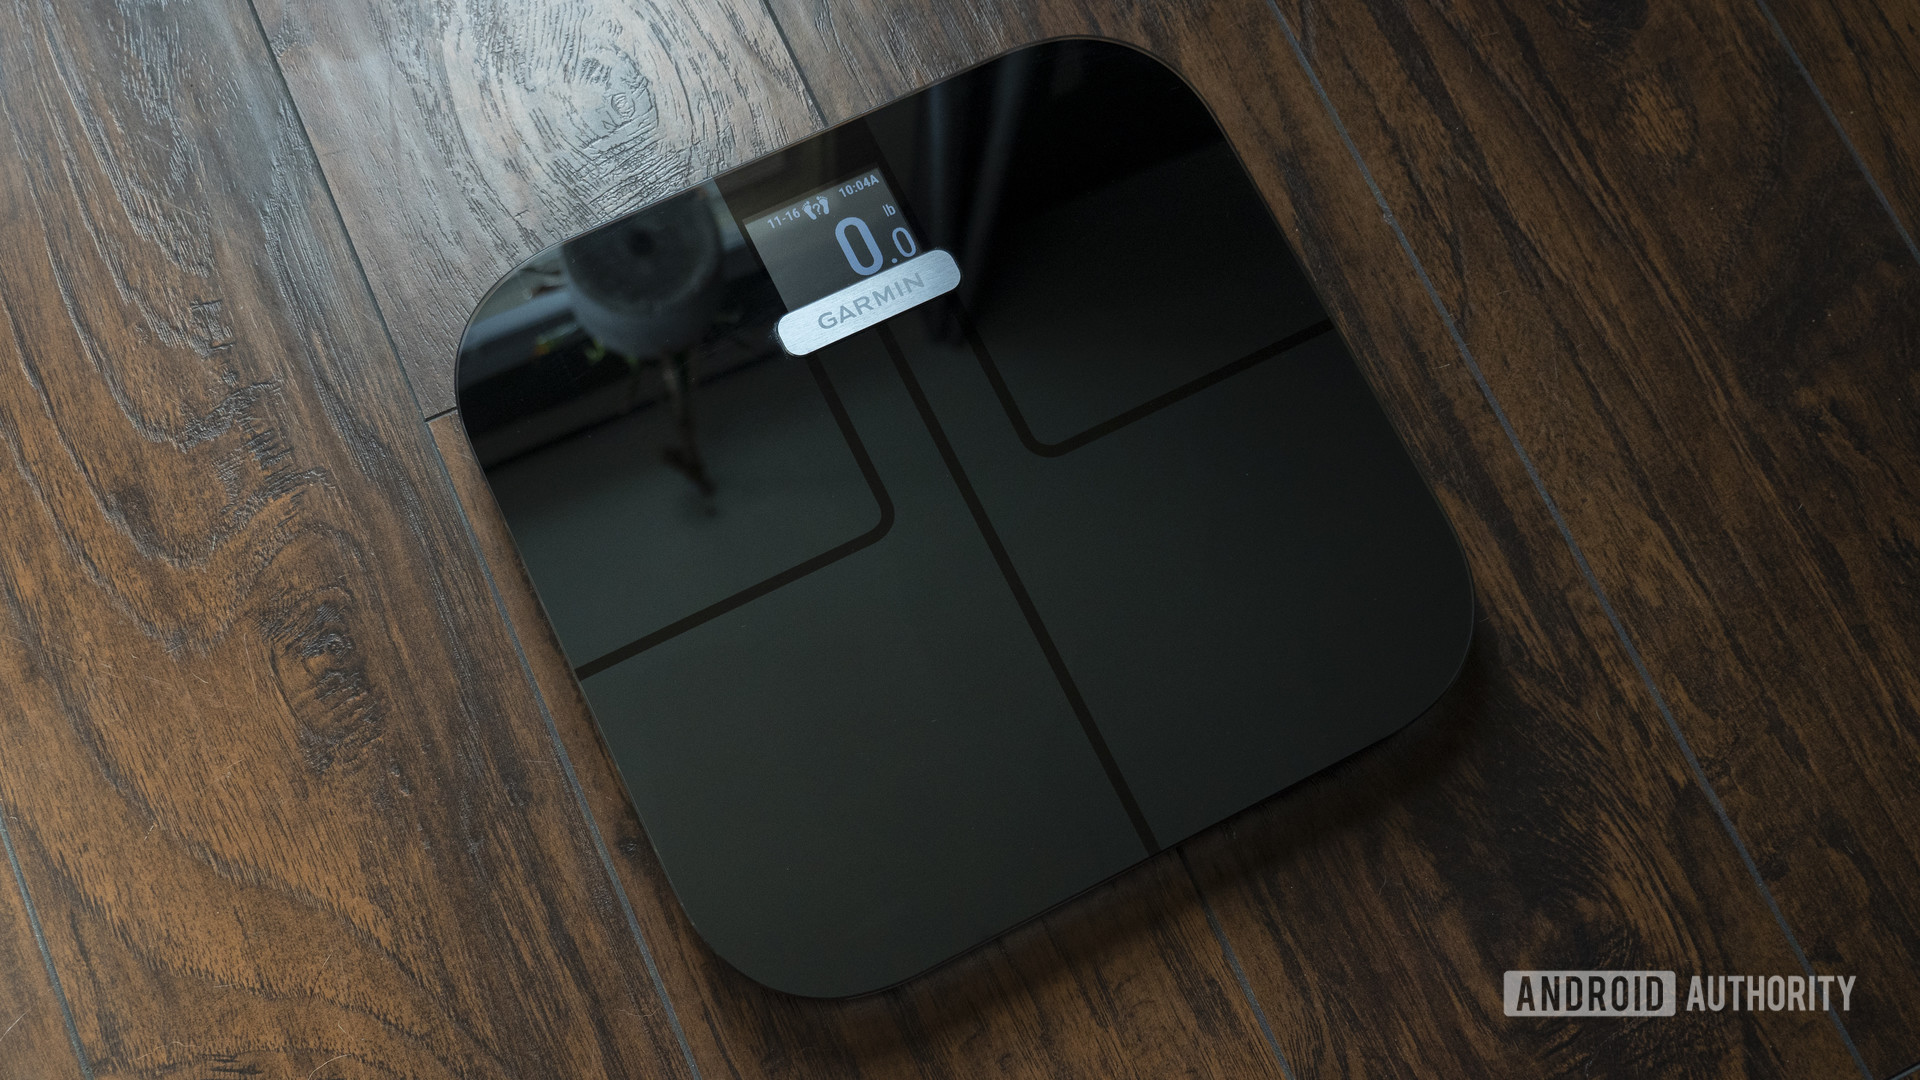 garmin index s2 smart scale review scale on floor